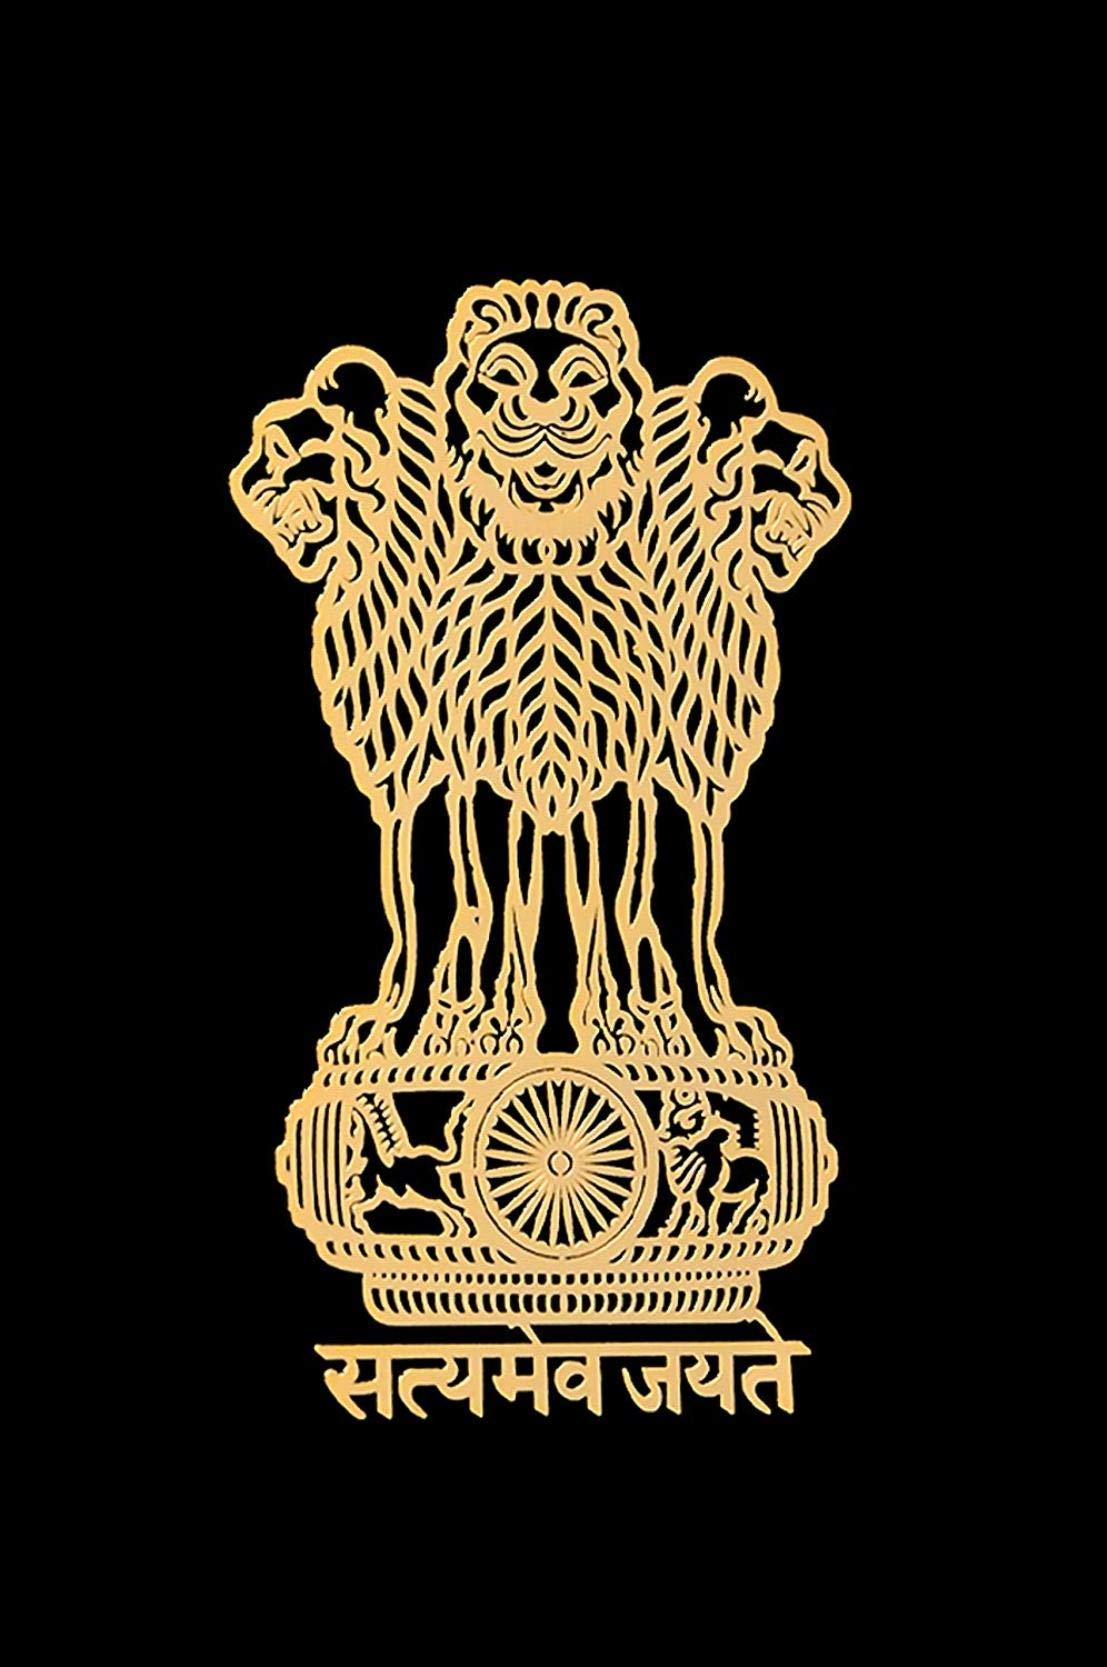 Tanish Satyamev Jayate Gold Plated Metal Sticker for Mobile Home Office File Car Bike Pack of 2- Buy Online in Greenland at greenland.desertcart.com. ProductId, 179693157